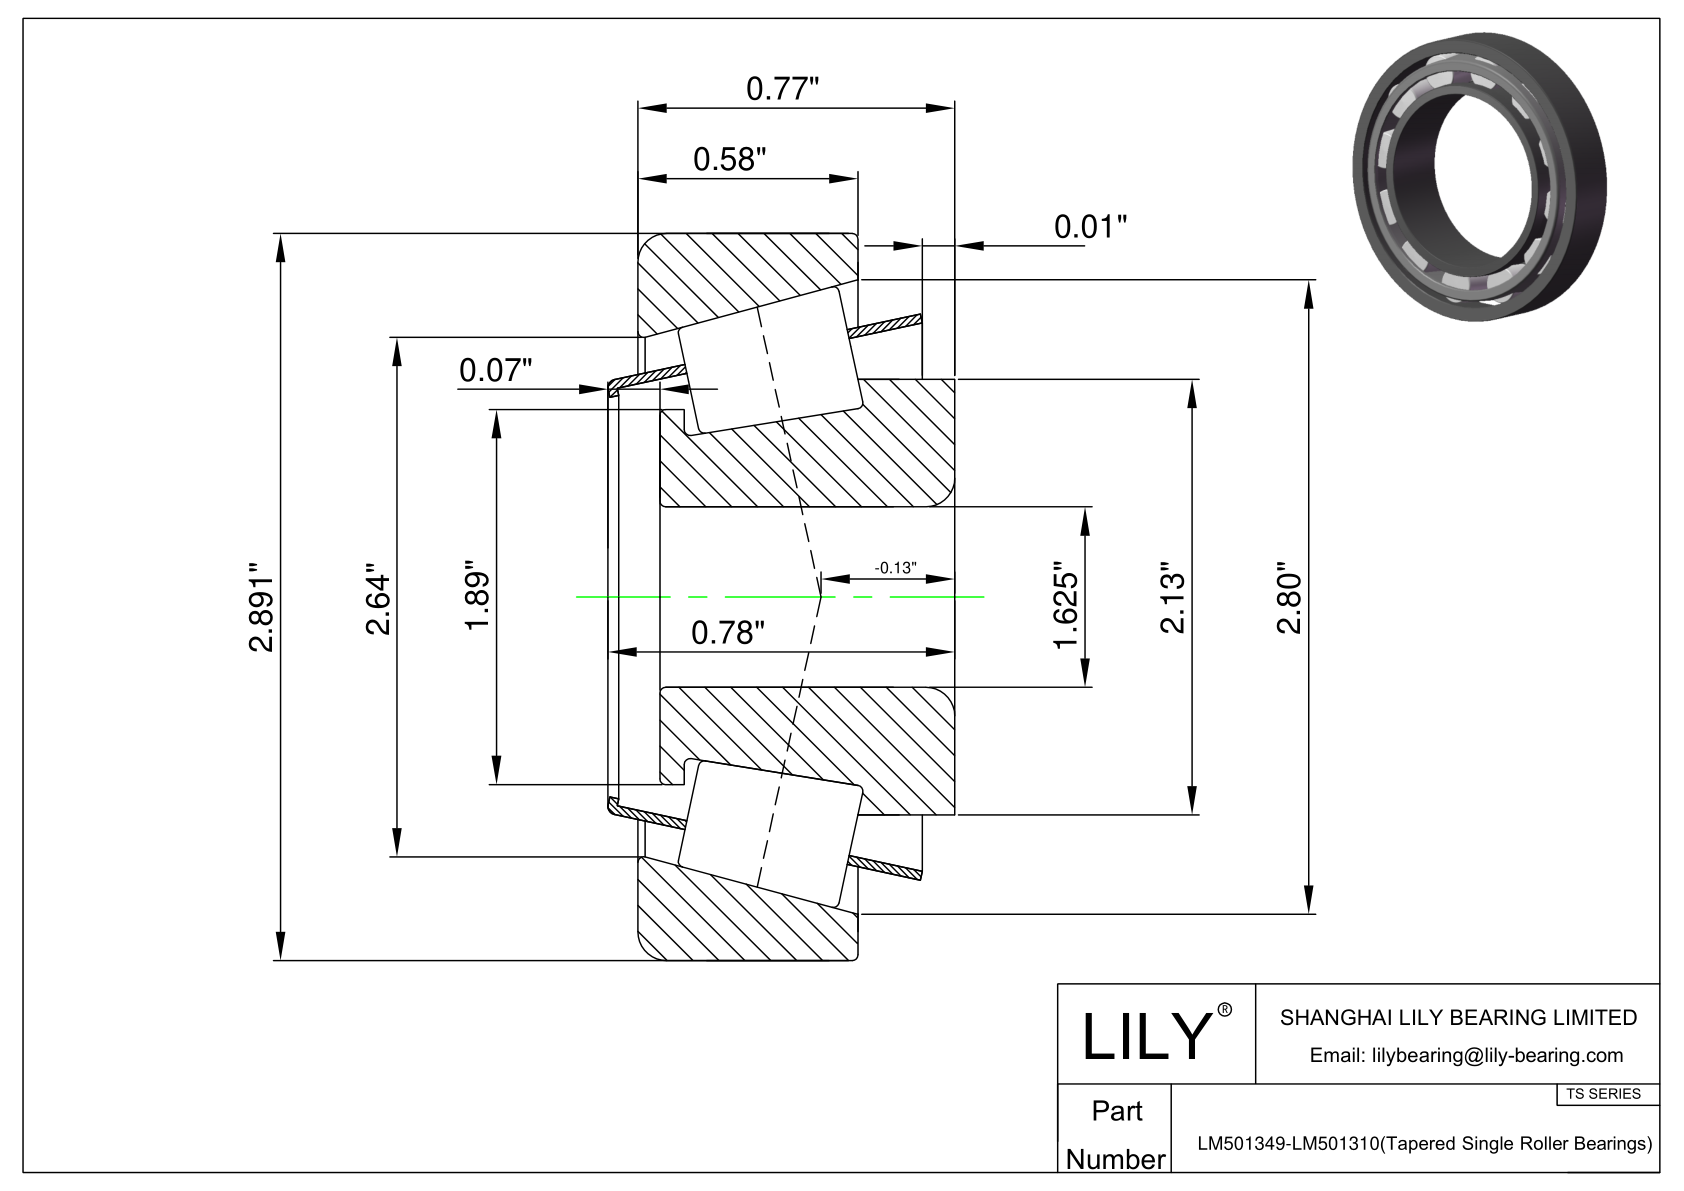 LM501349-LM501310 TS (Tapered Single Roller Bearings) (Imperial) cad drawing